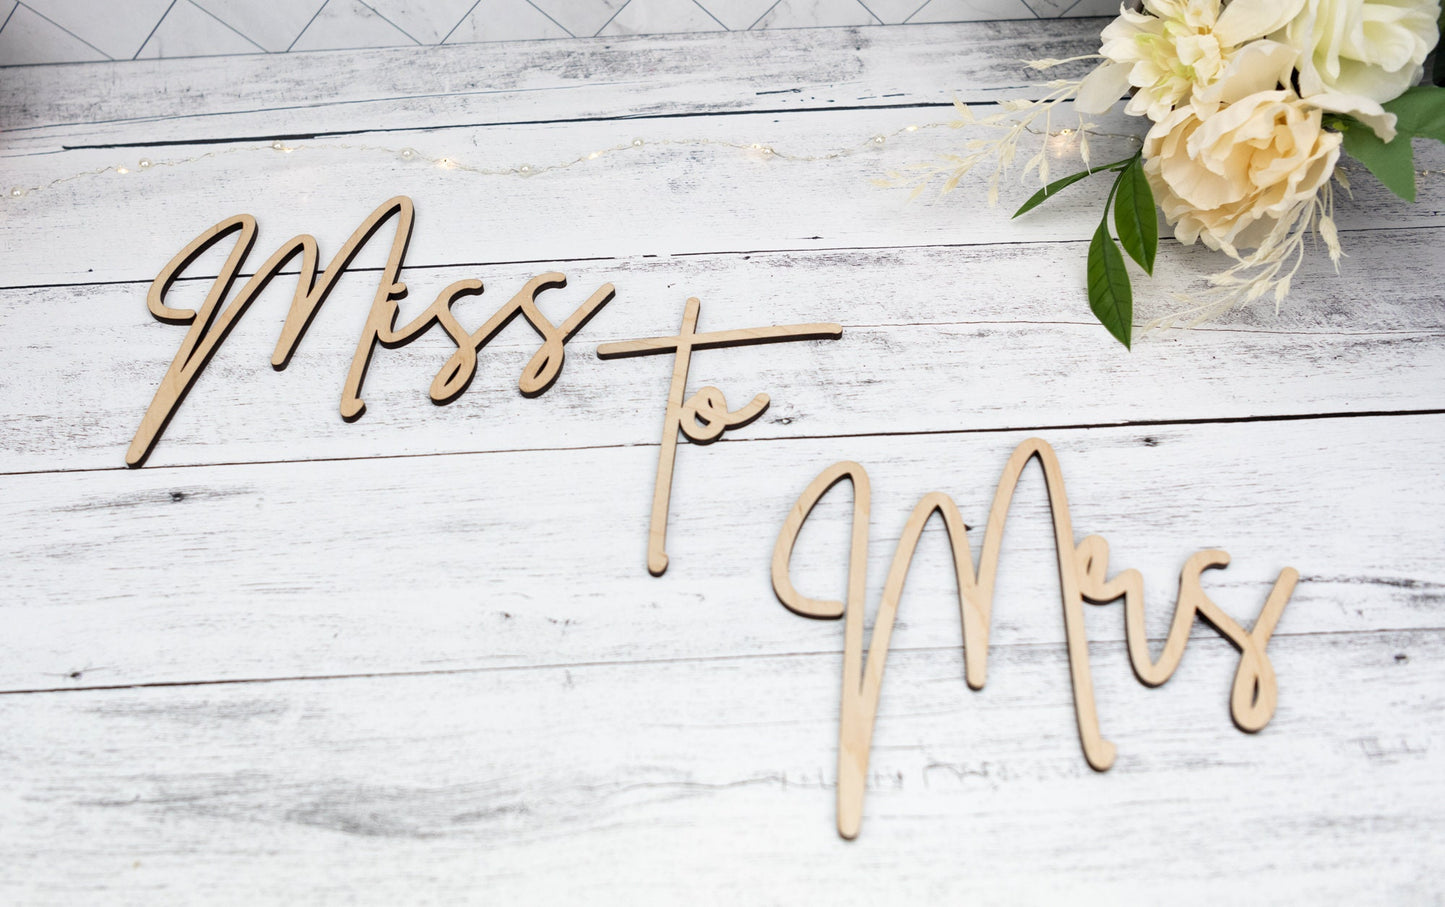 Miss to Mrs backdrop sign for bridal shower or engagement party,  Wood Bridal Shower Decor, Custom Wedding Decor, Wooden word cutouts